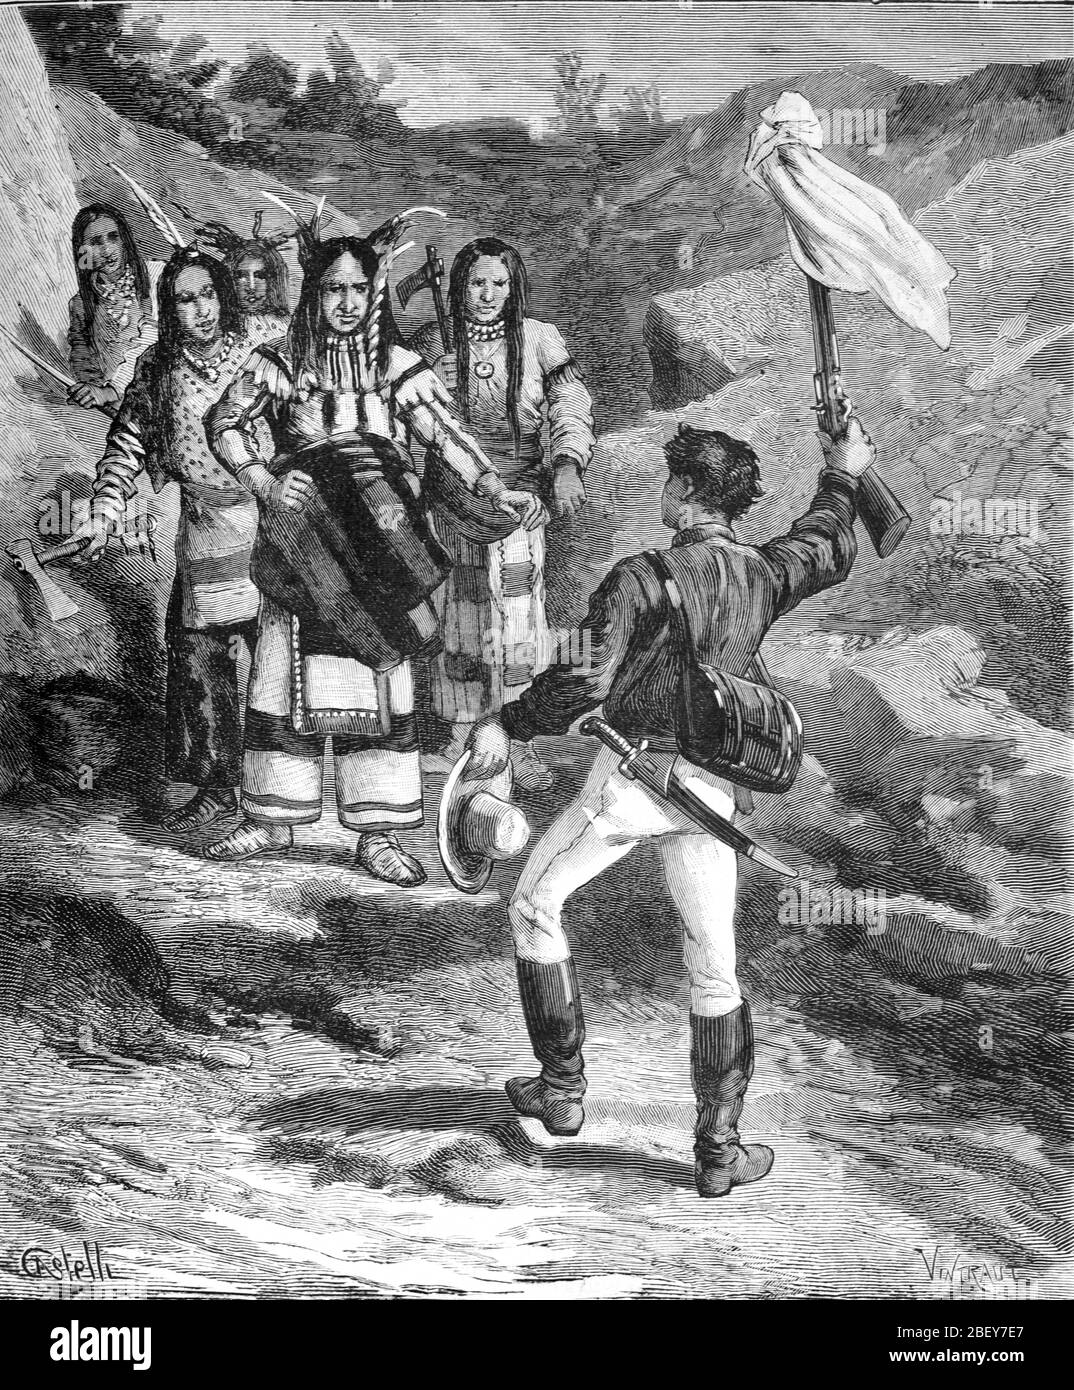 Gold Miner in California Raises Peace Flag on Rifle in Encounter with First Nation People or Native Americans. Vintage or Old Illustration or Engraving 1888 Stock Photo